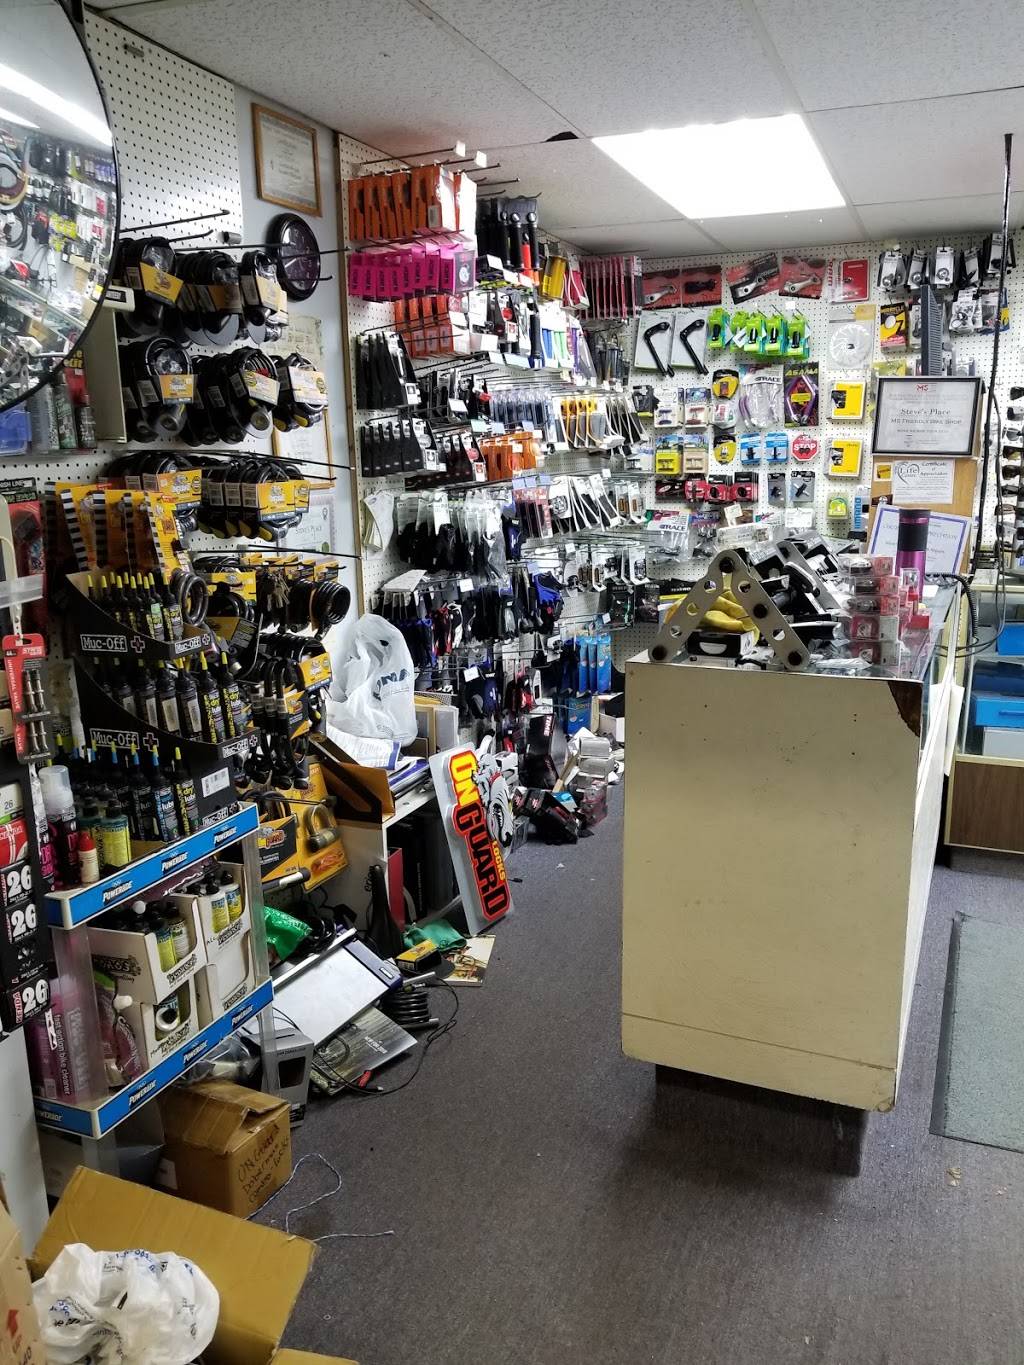 Steves Place Bicycles & Repair | 181 Niagara Blvd, Fort Erie, ON L2A 3G7, Canada | Phone: (905) 871-7517